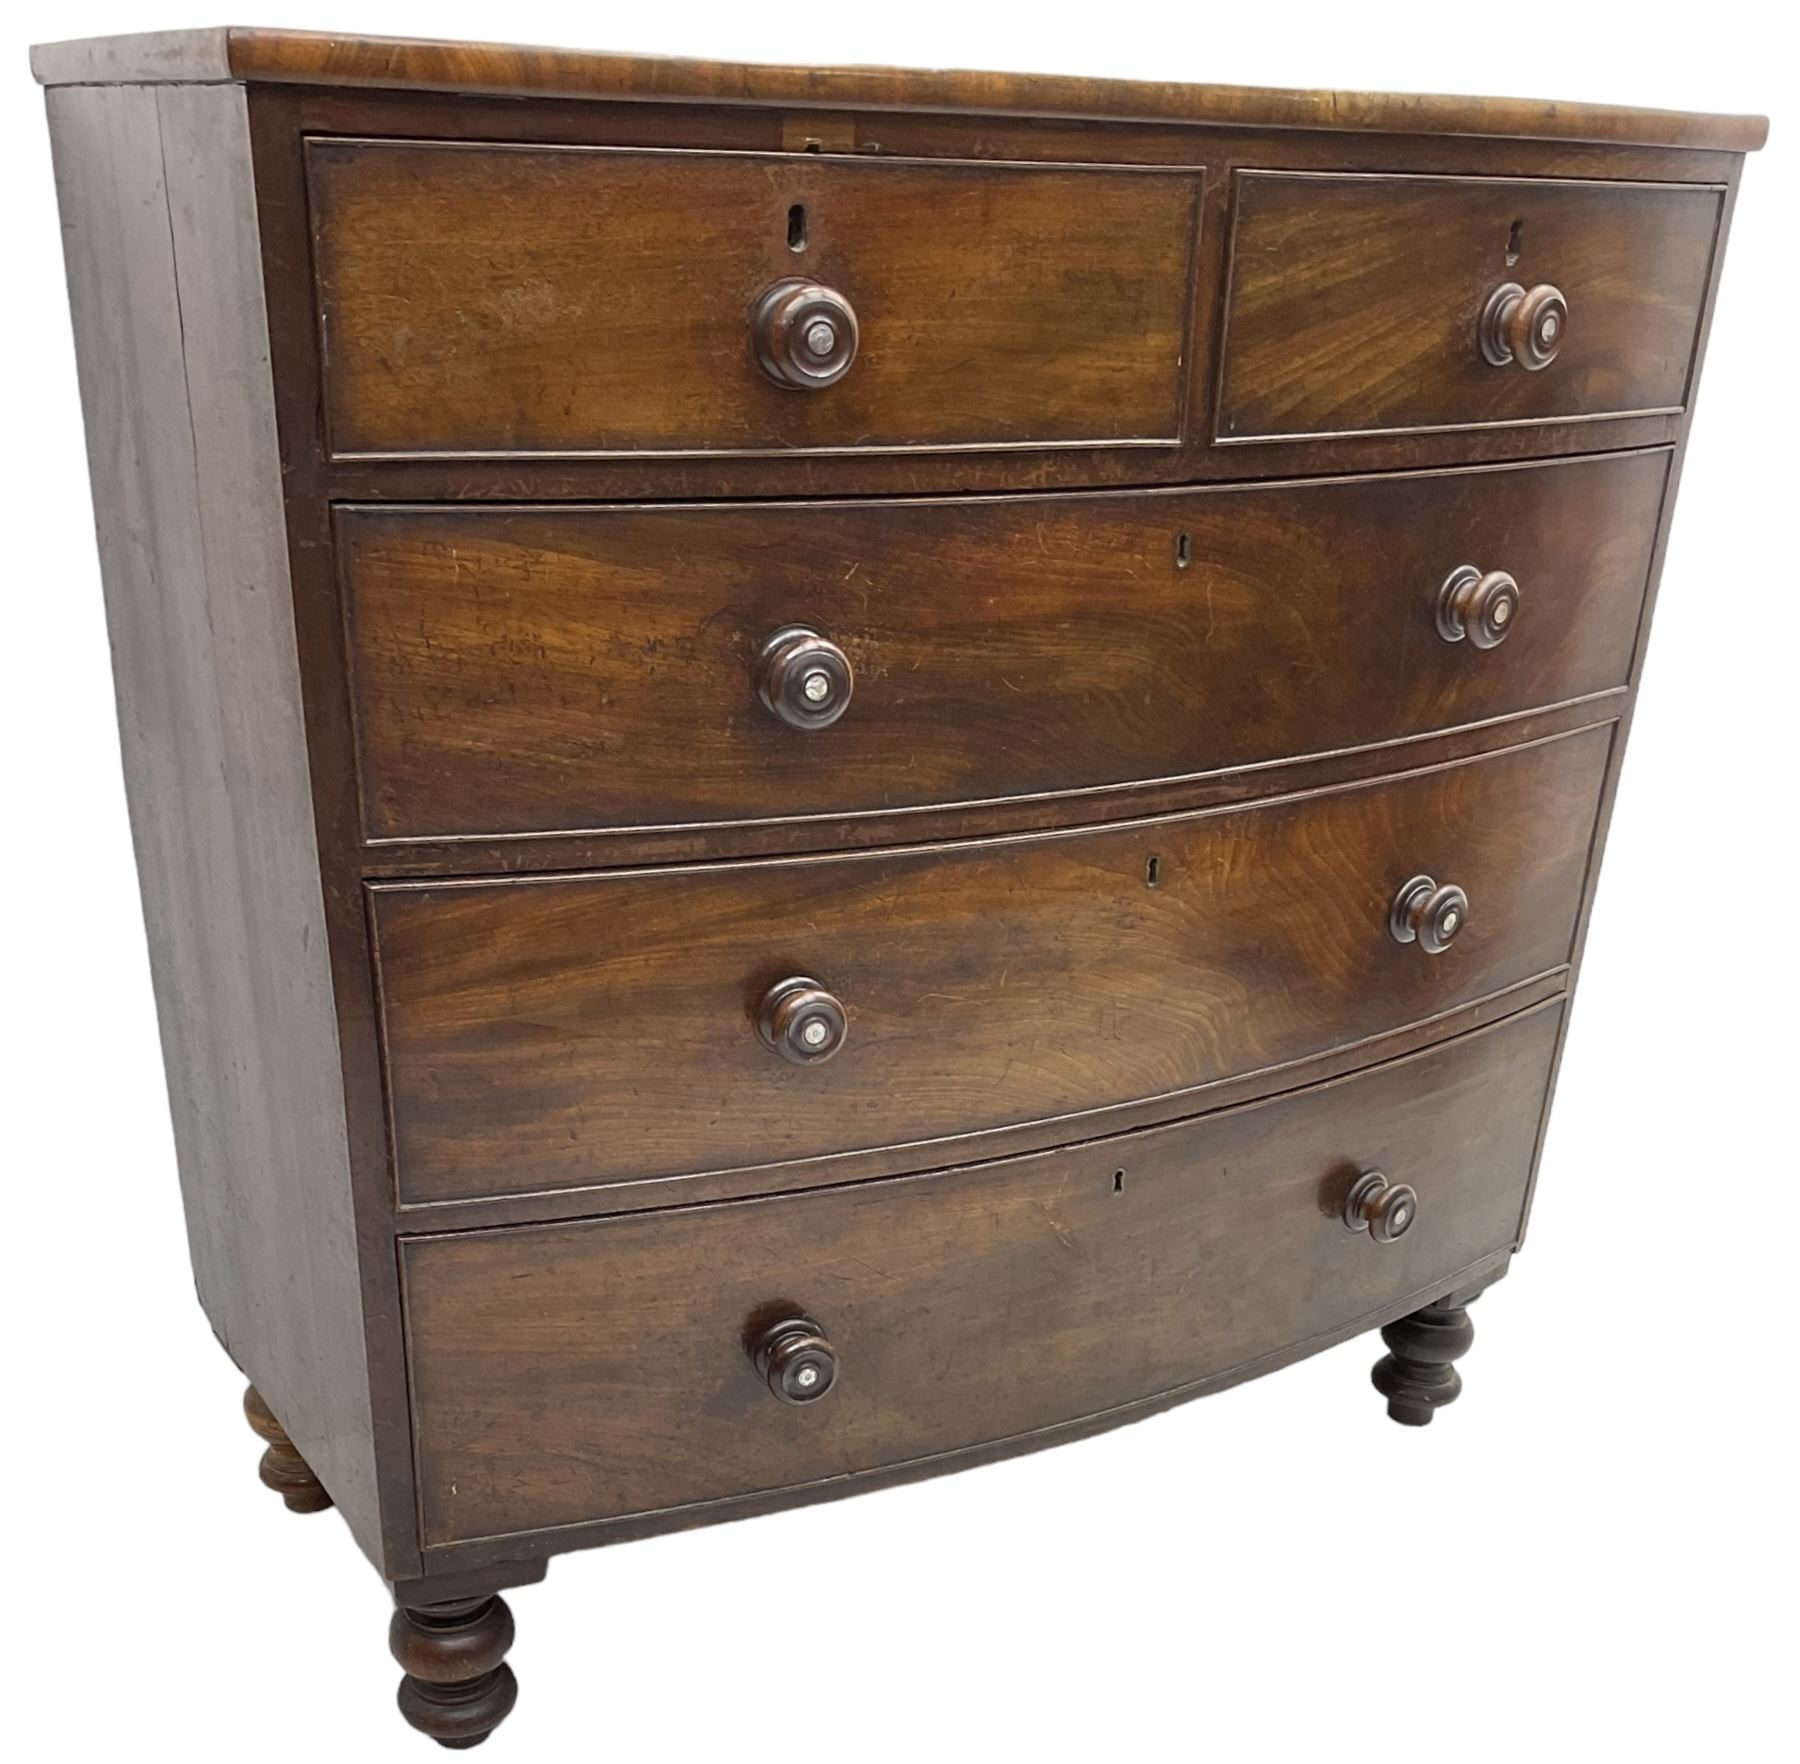 Victorian mahogany bow-front chest - Image 7 of 7